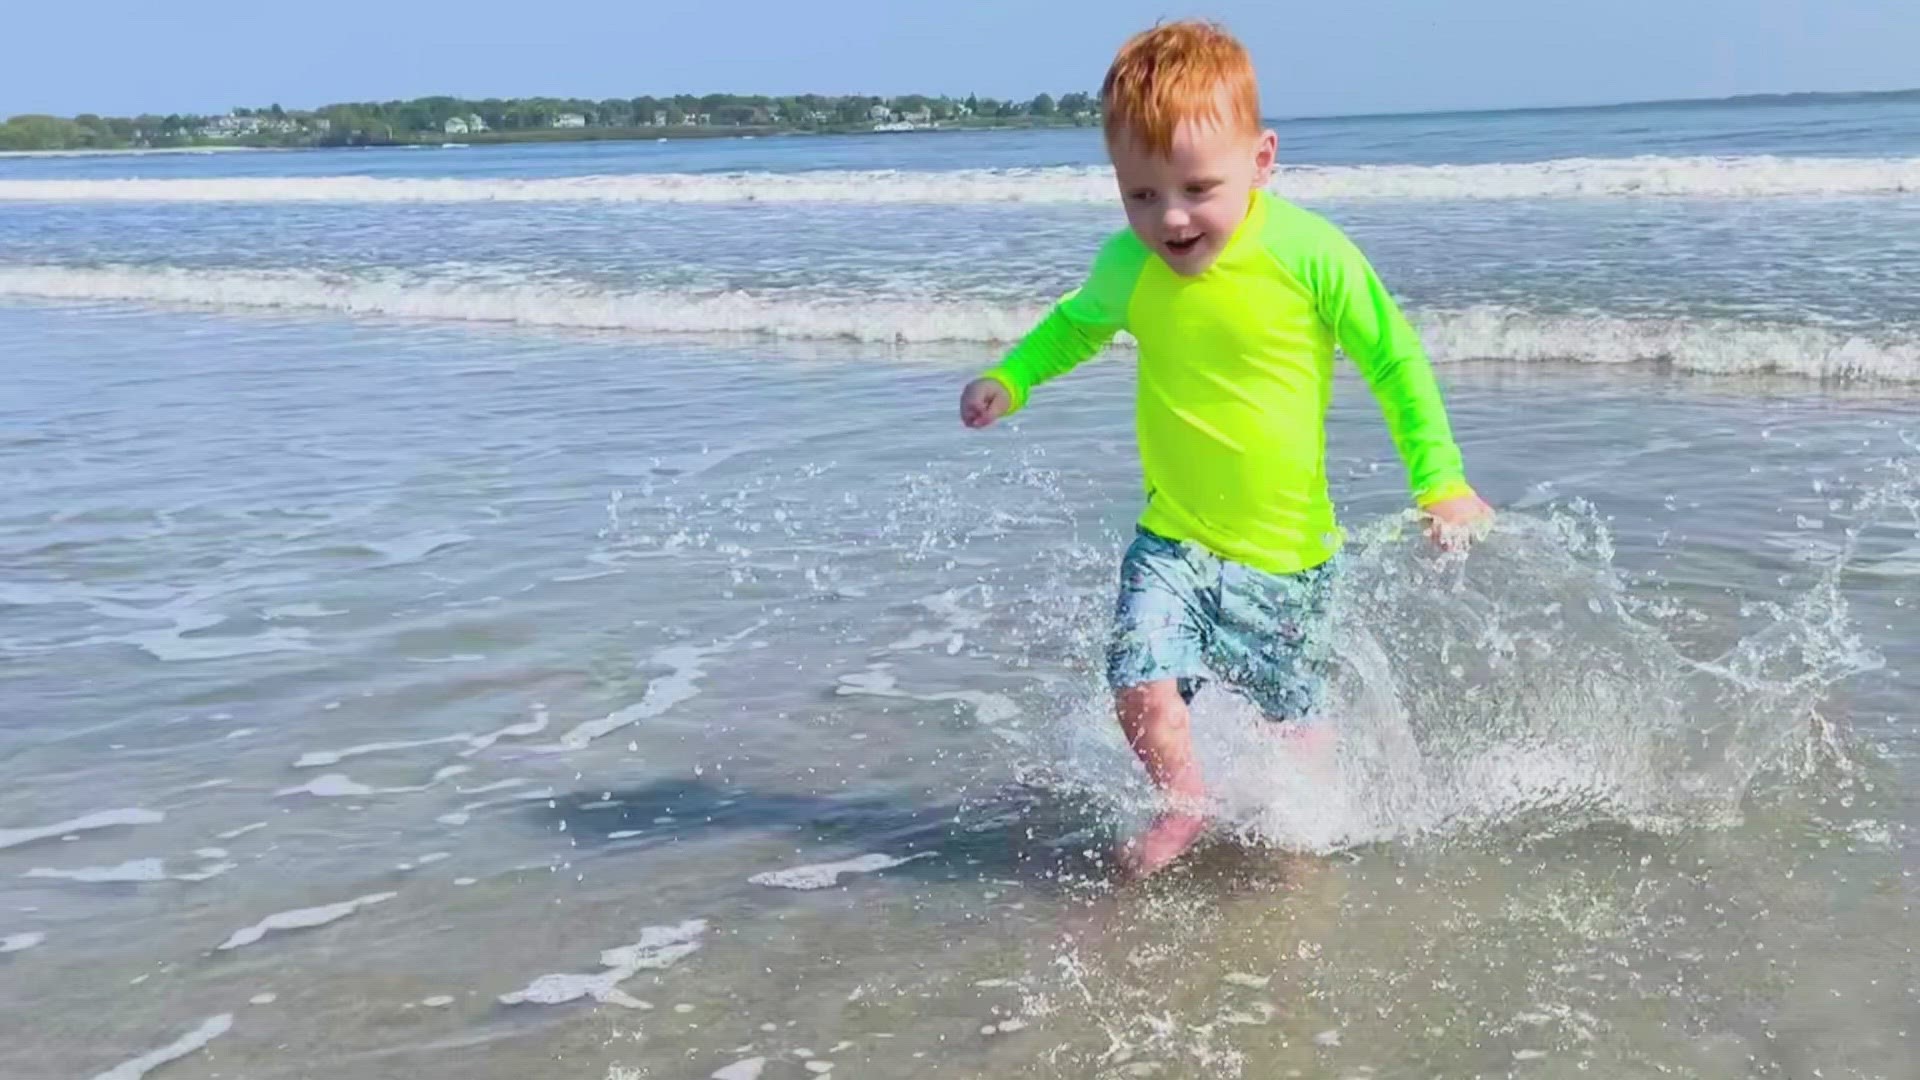 The three Maine moms all have young kids and say neon rash guards can help them easily spot their kids in and around the water.